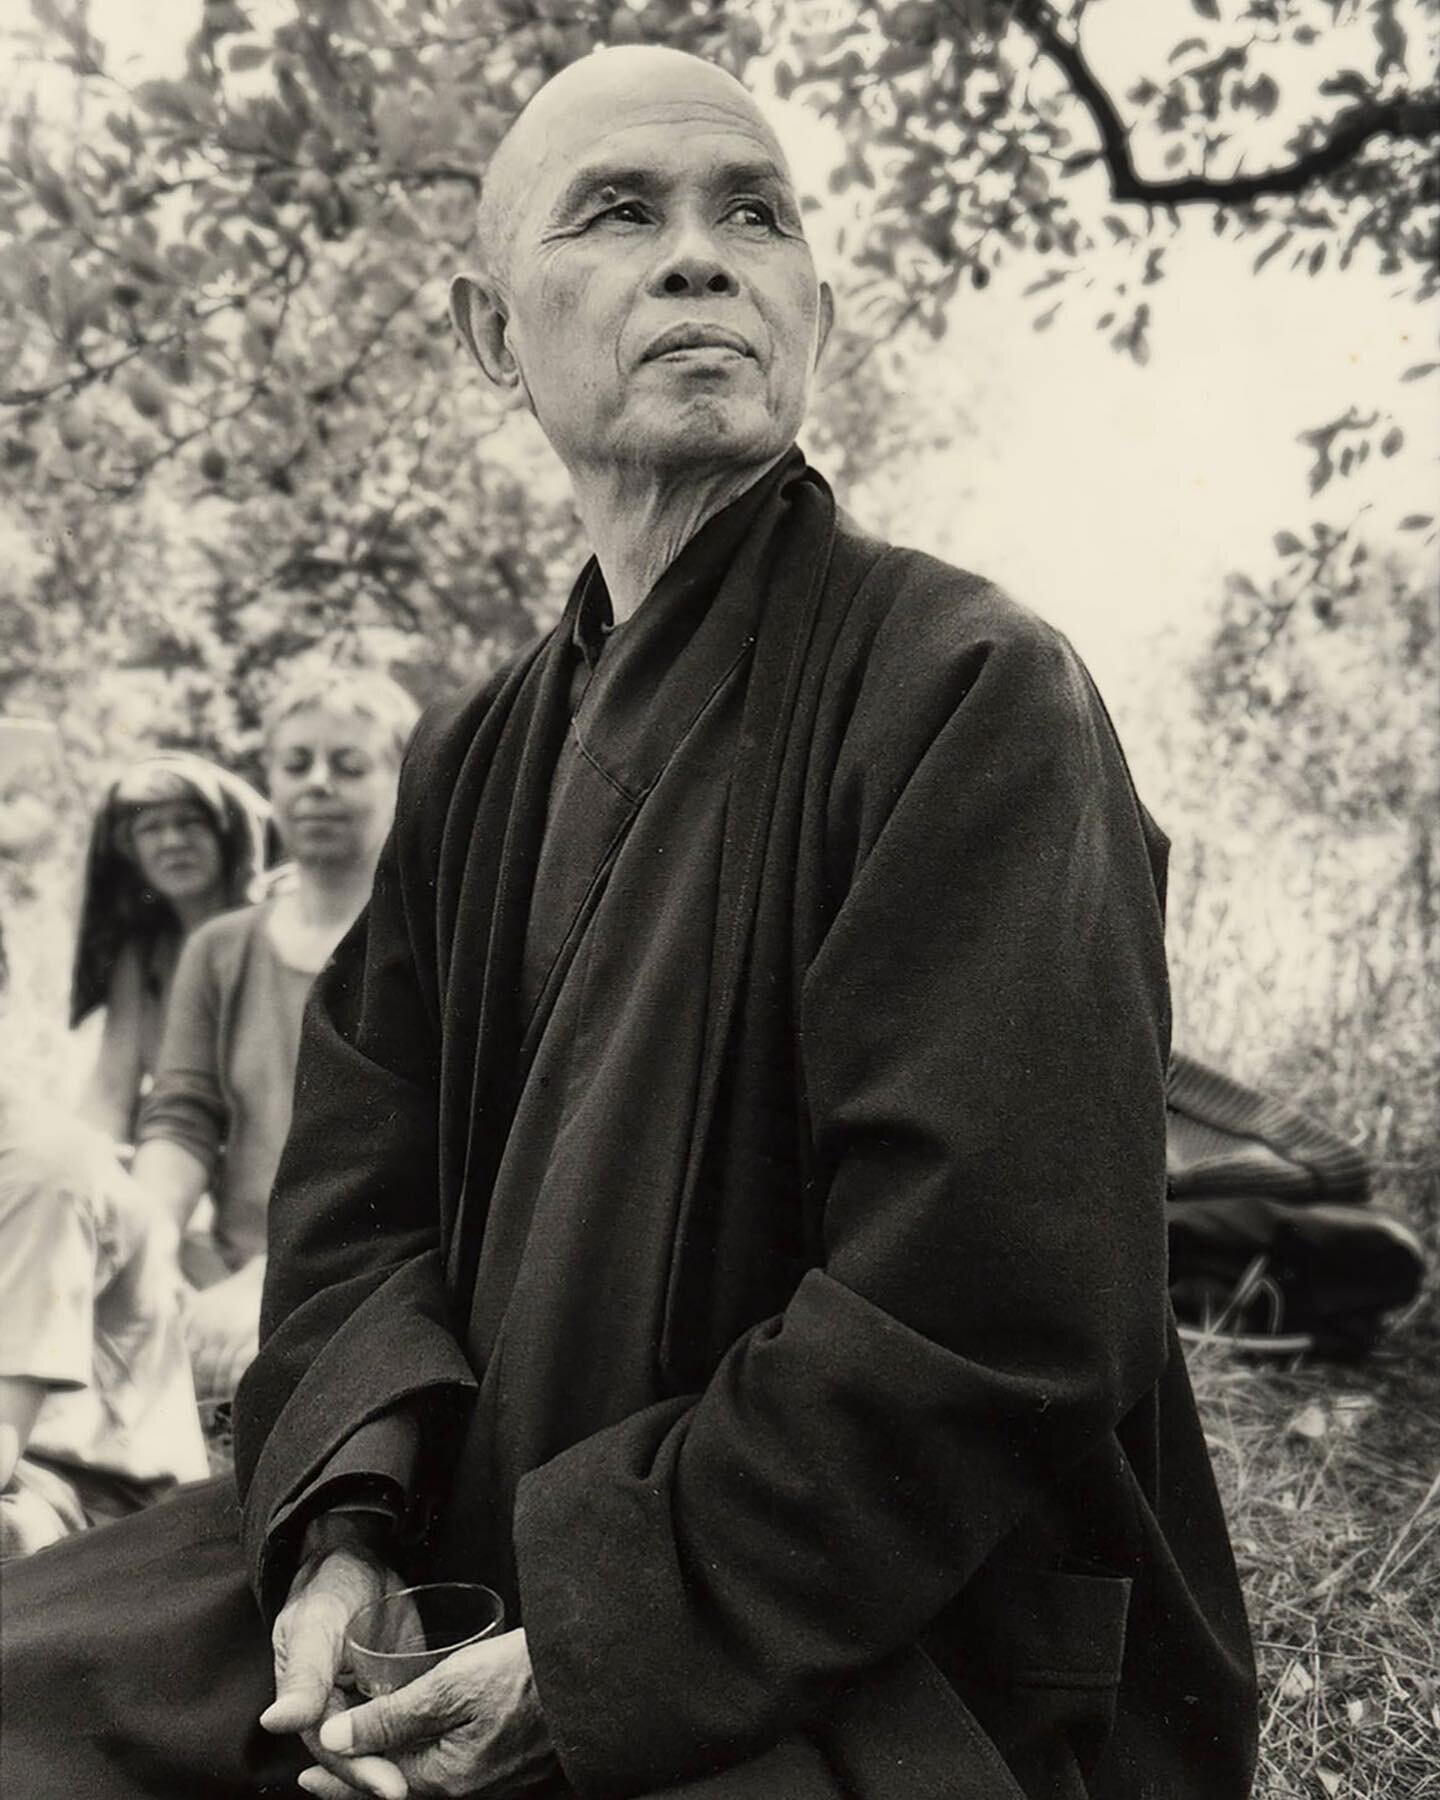 We are so saddened by the passing of Vietnamese zen master, peace activist, and founder of the Plum Village Tradition Thich Nhat Hanh, a.k.a &ldquo;The father of Mindfulness&rdquo;. 

His teachings inspired us in so many ways and transformed the way 